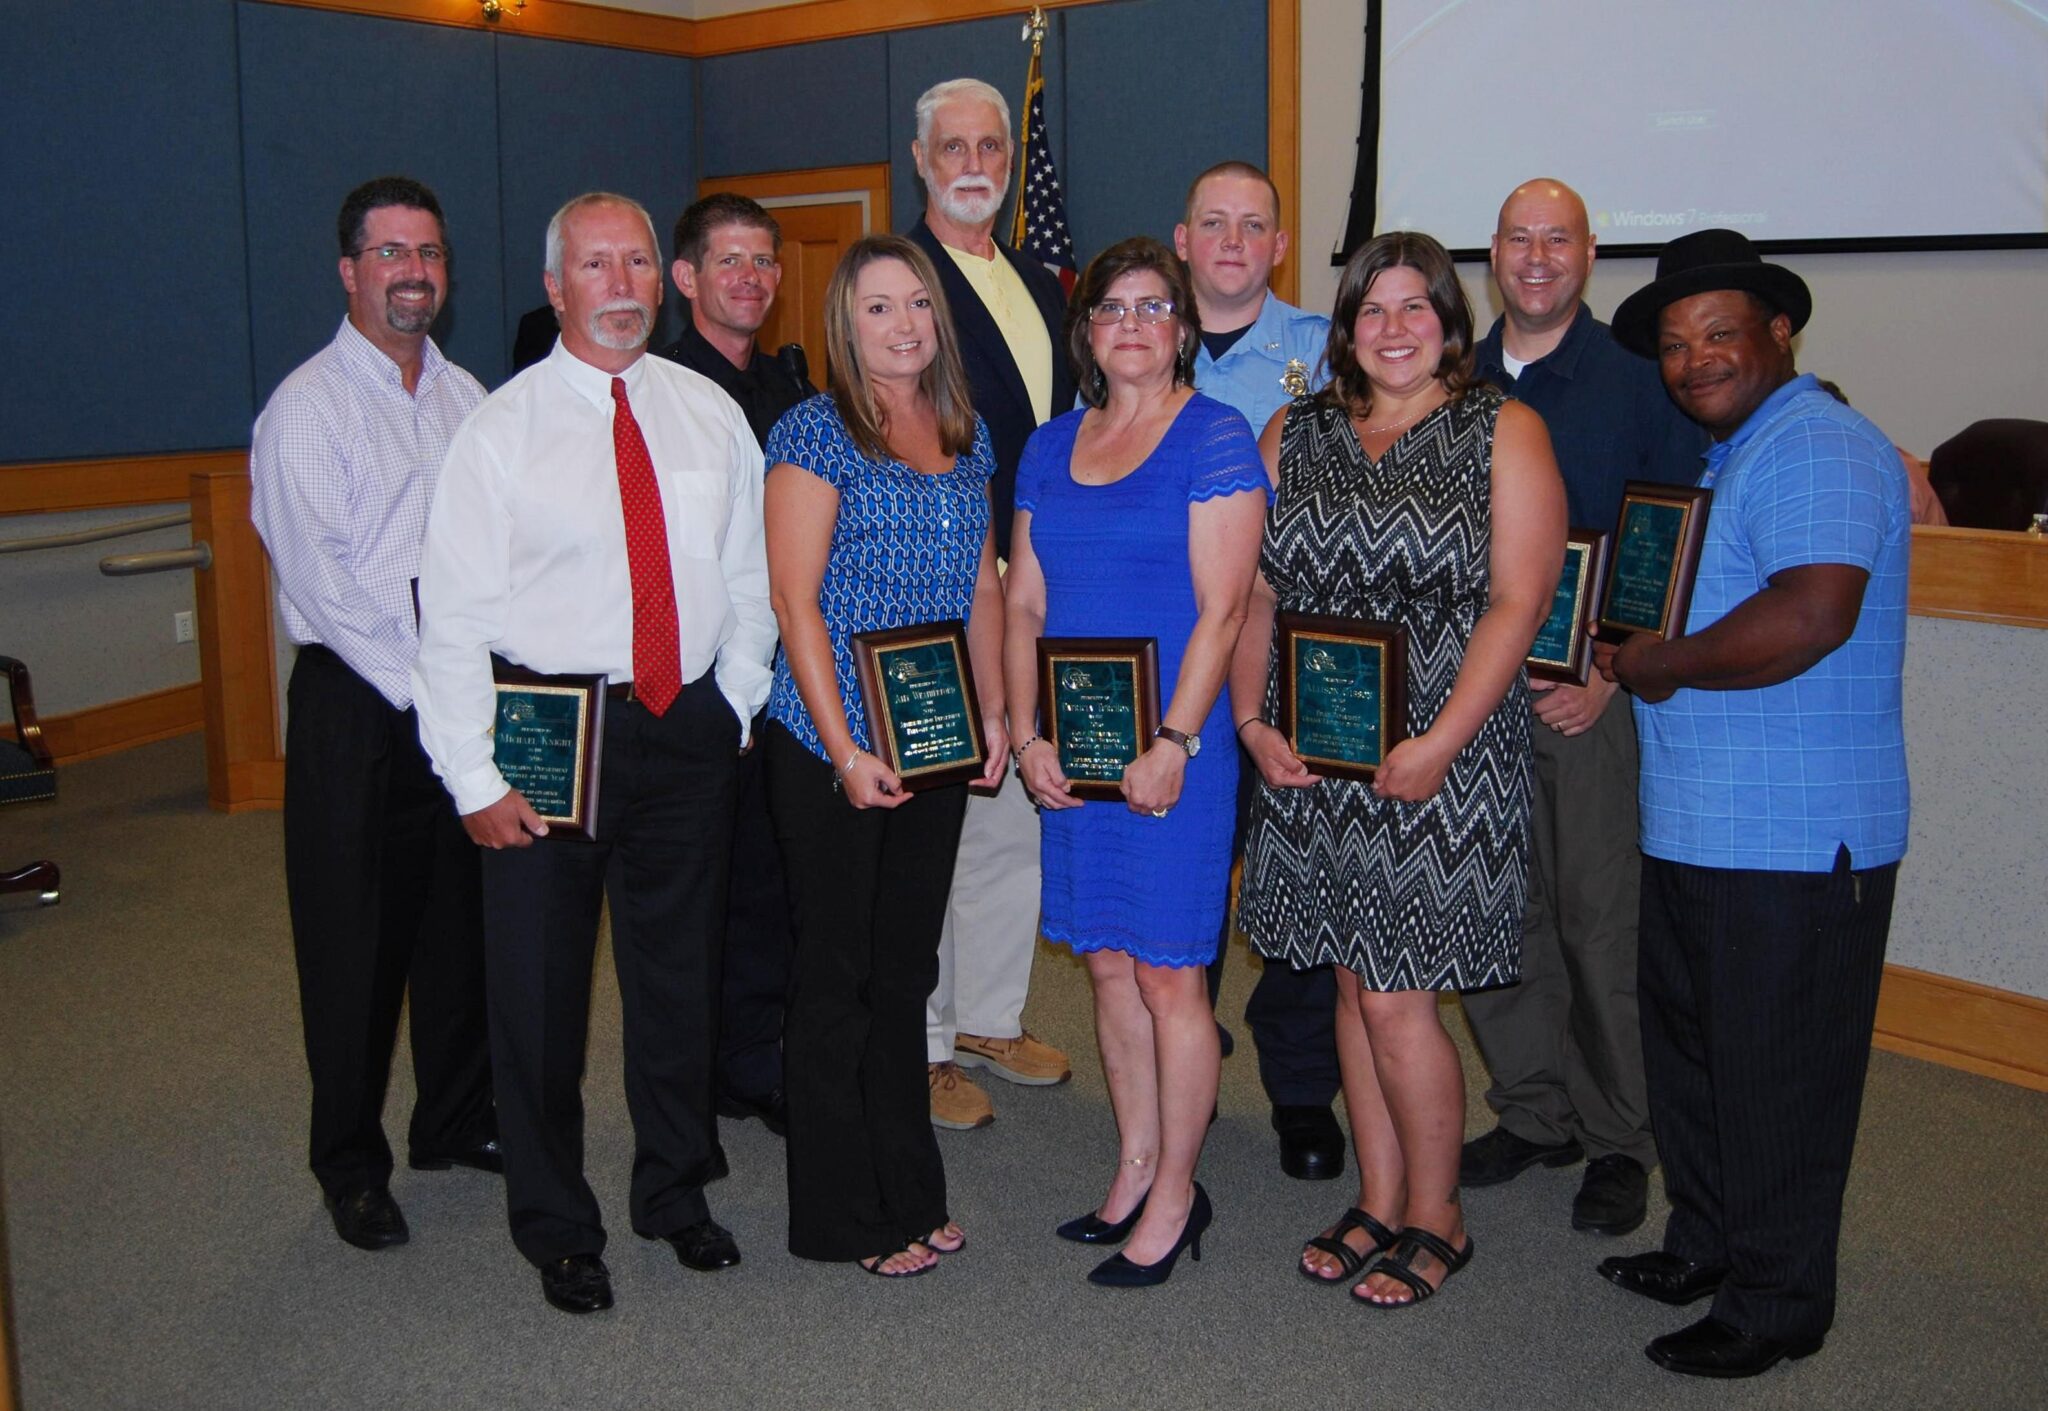 City of Goose Creek 2016 honorees (l-r) Bobby Donnellan, Michael Knight, Justin Hart, Amy Weatherford, Rick Buckner, Patricia Turchon, Sean Nordaby, Allison Gibson, Jason Strong and Ezekiel “Zeke” Banks.